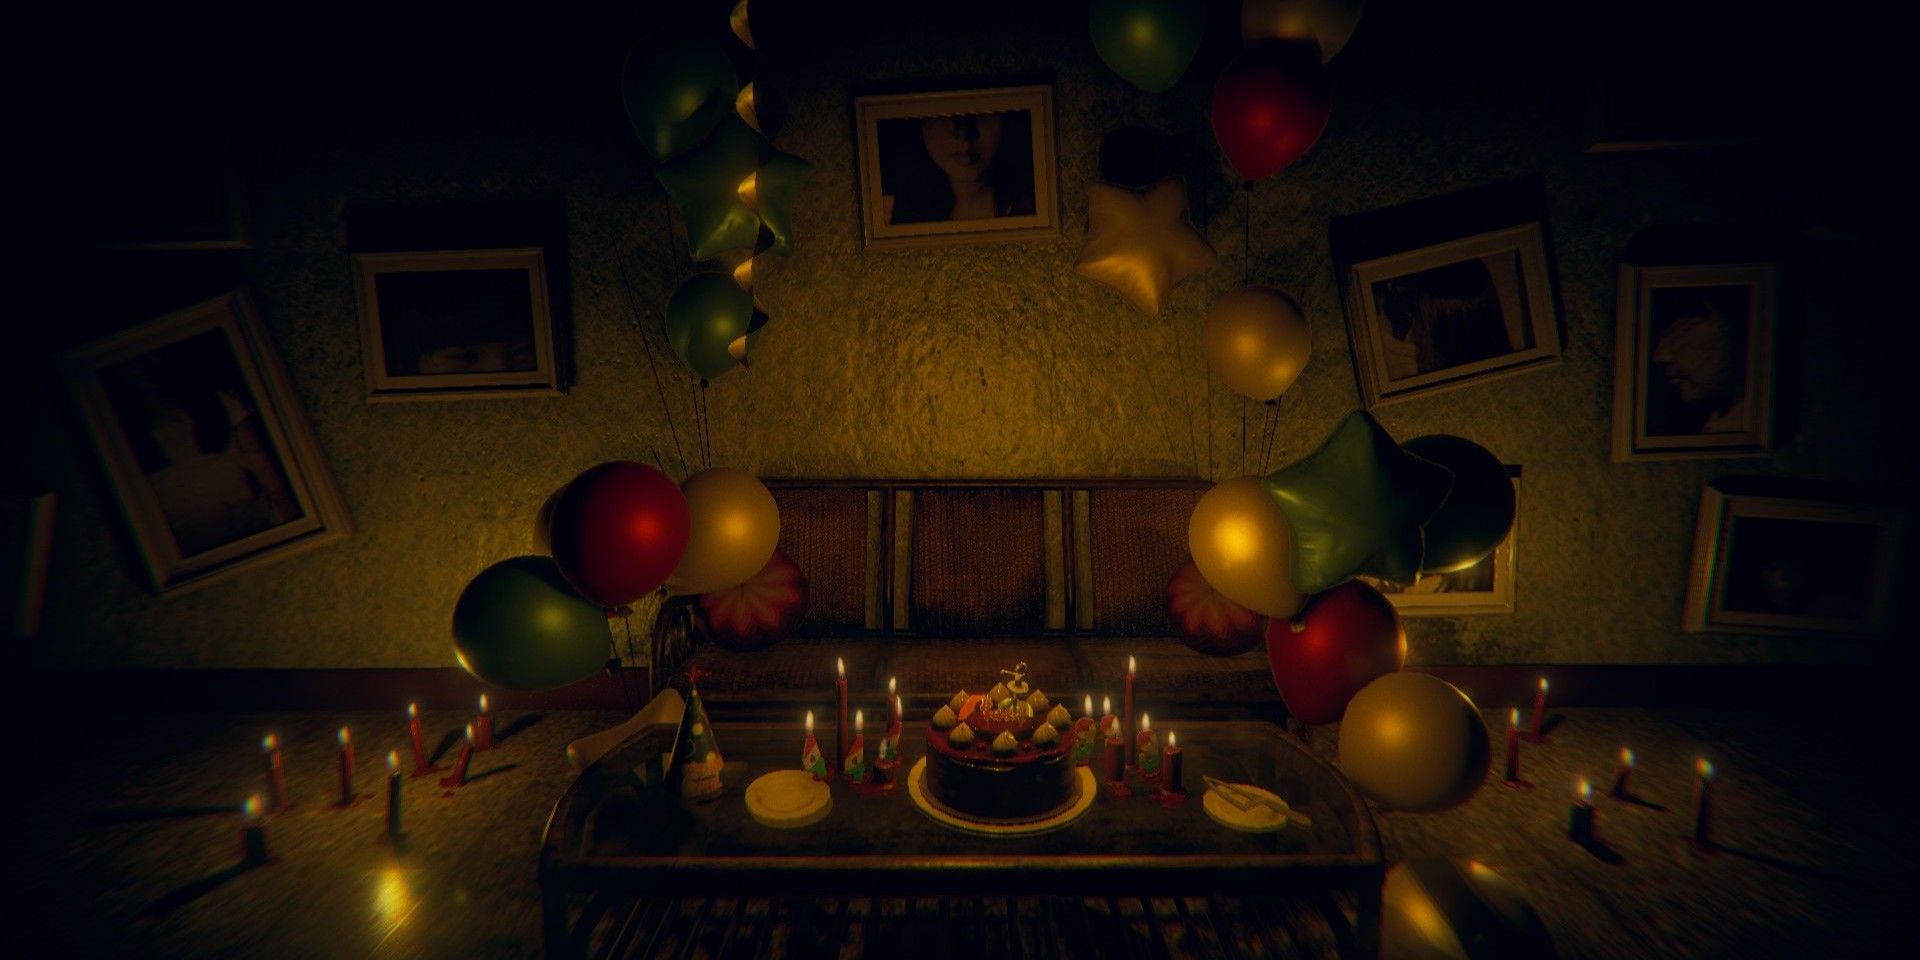 The birthday cake scene from the Taiwanese horror game Devotion.